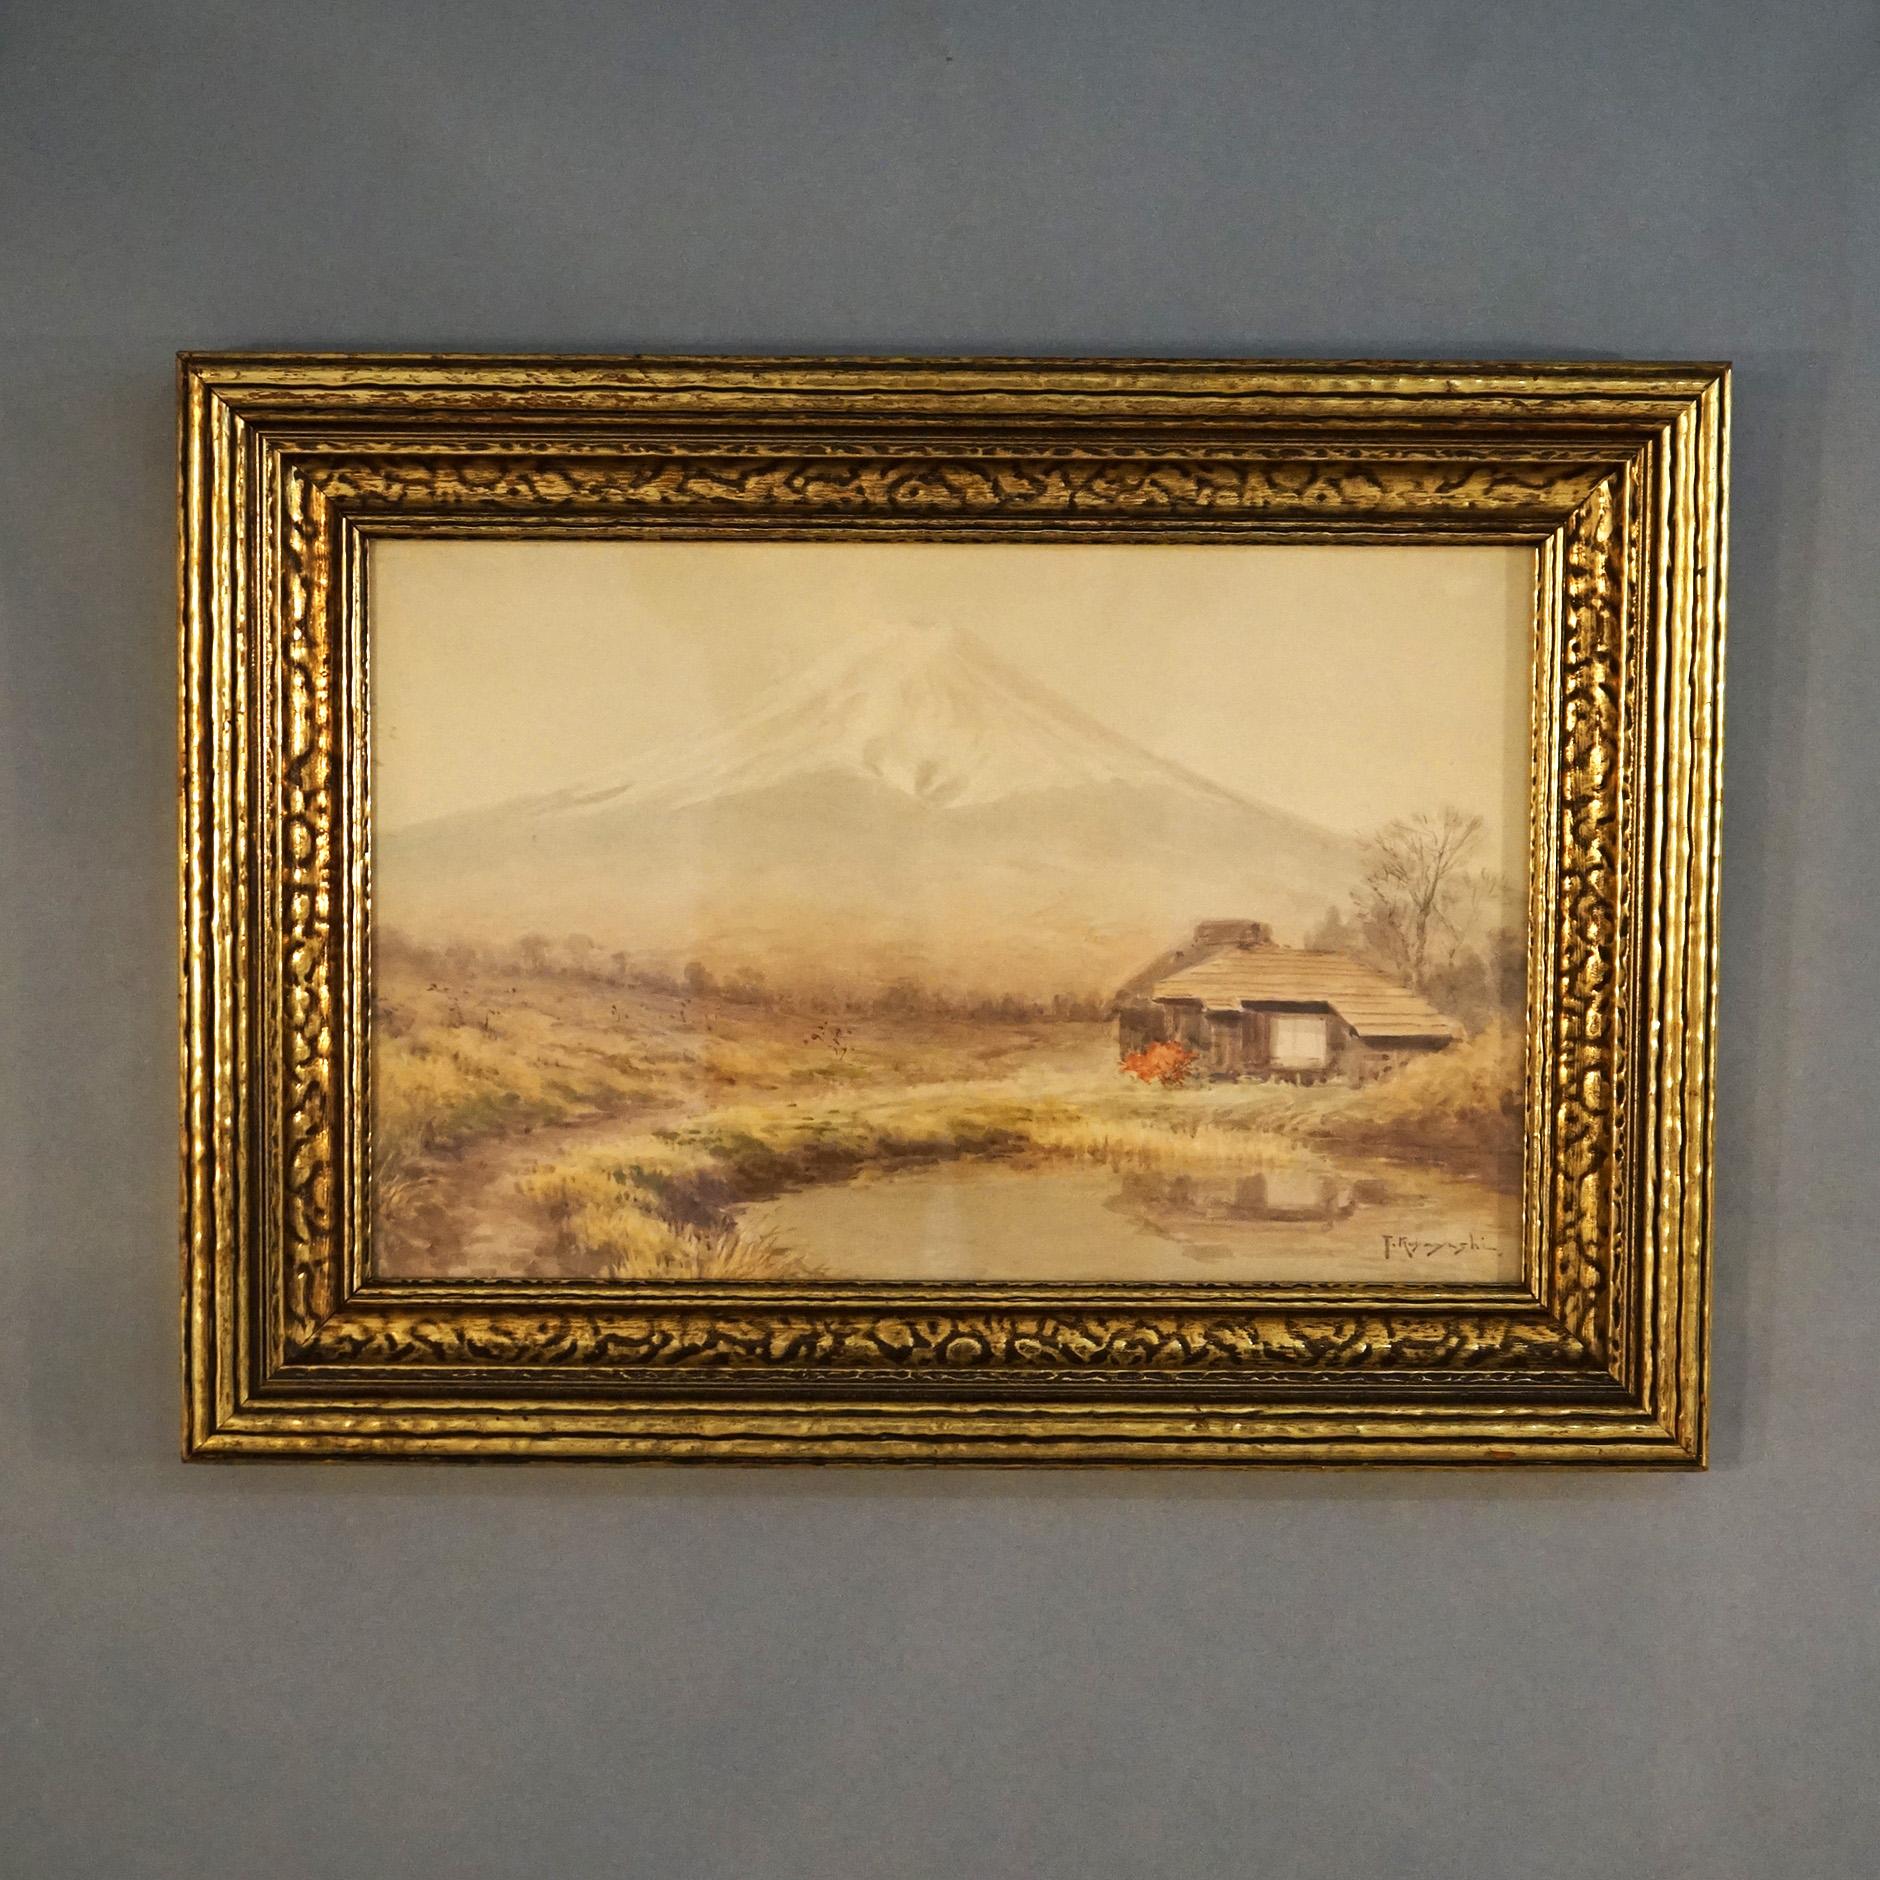 Antique Japanese Meiji Watercolor of Mt. Fuji with a Structure by T. Kobayashi c1920

Measures - overall 18